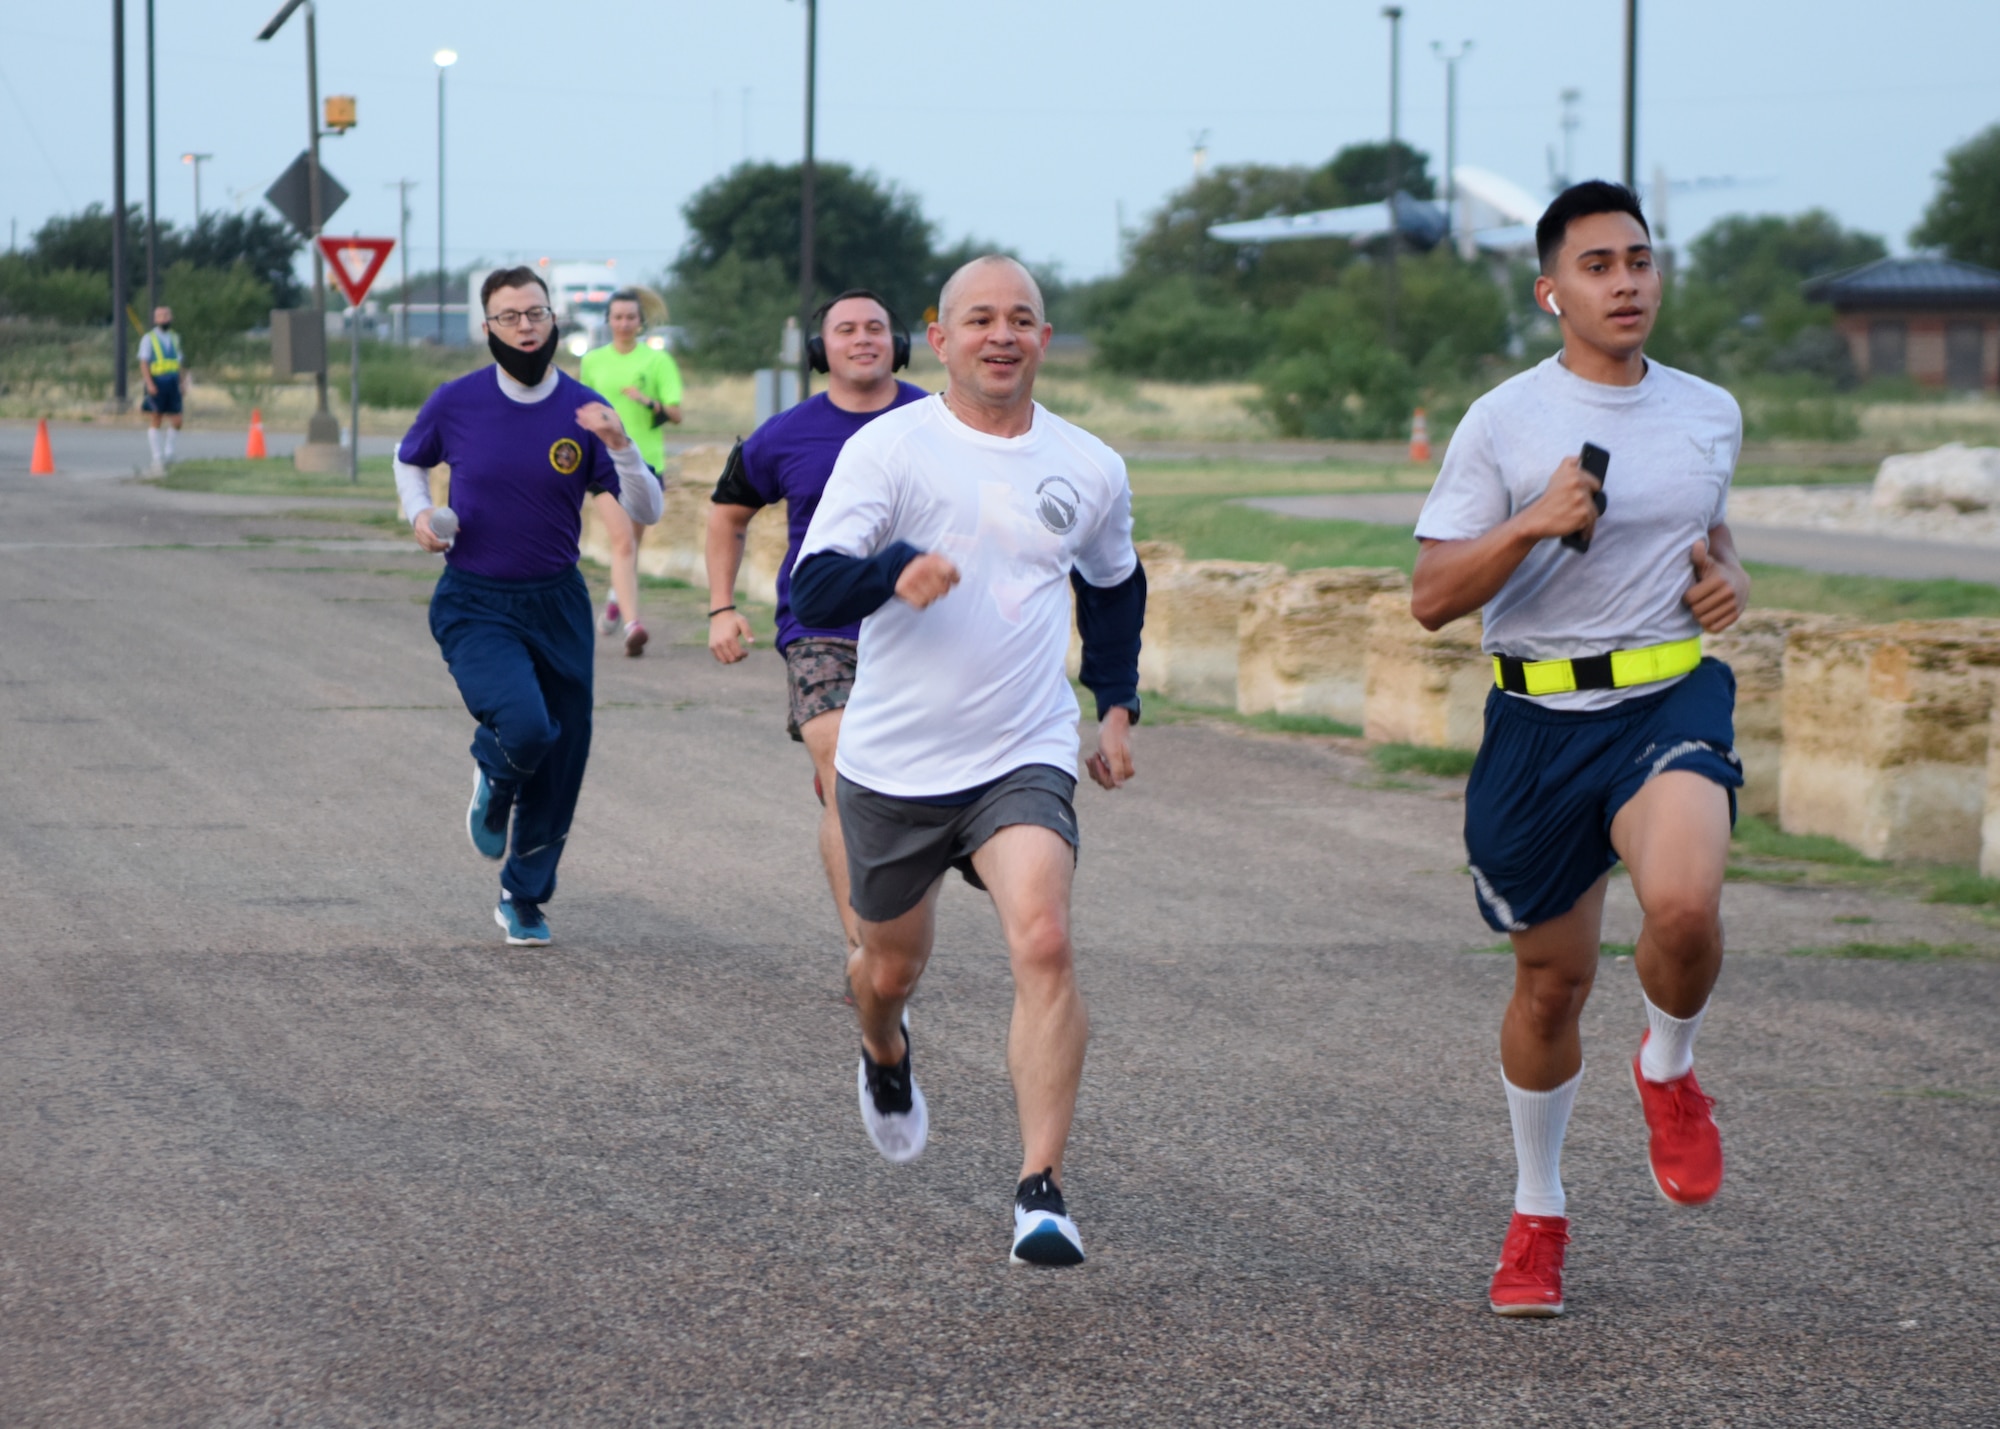 U.S. Air Force Col. Nazario, 17th Training Wing commander, races a student to the finish line during the Celebration of You run on Goodfellow Air Force Base, Texas, Sept. 17, 2020. Nazario returned after finishing to run with Airmen and encouraged them. (U.S. Air Force photo by Airman 1st Class Ethan Sherwood)